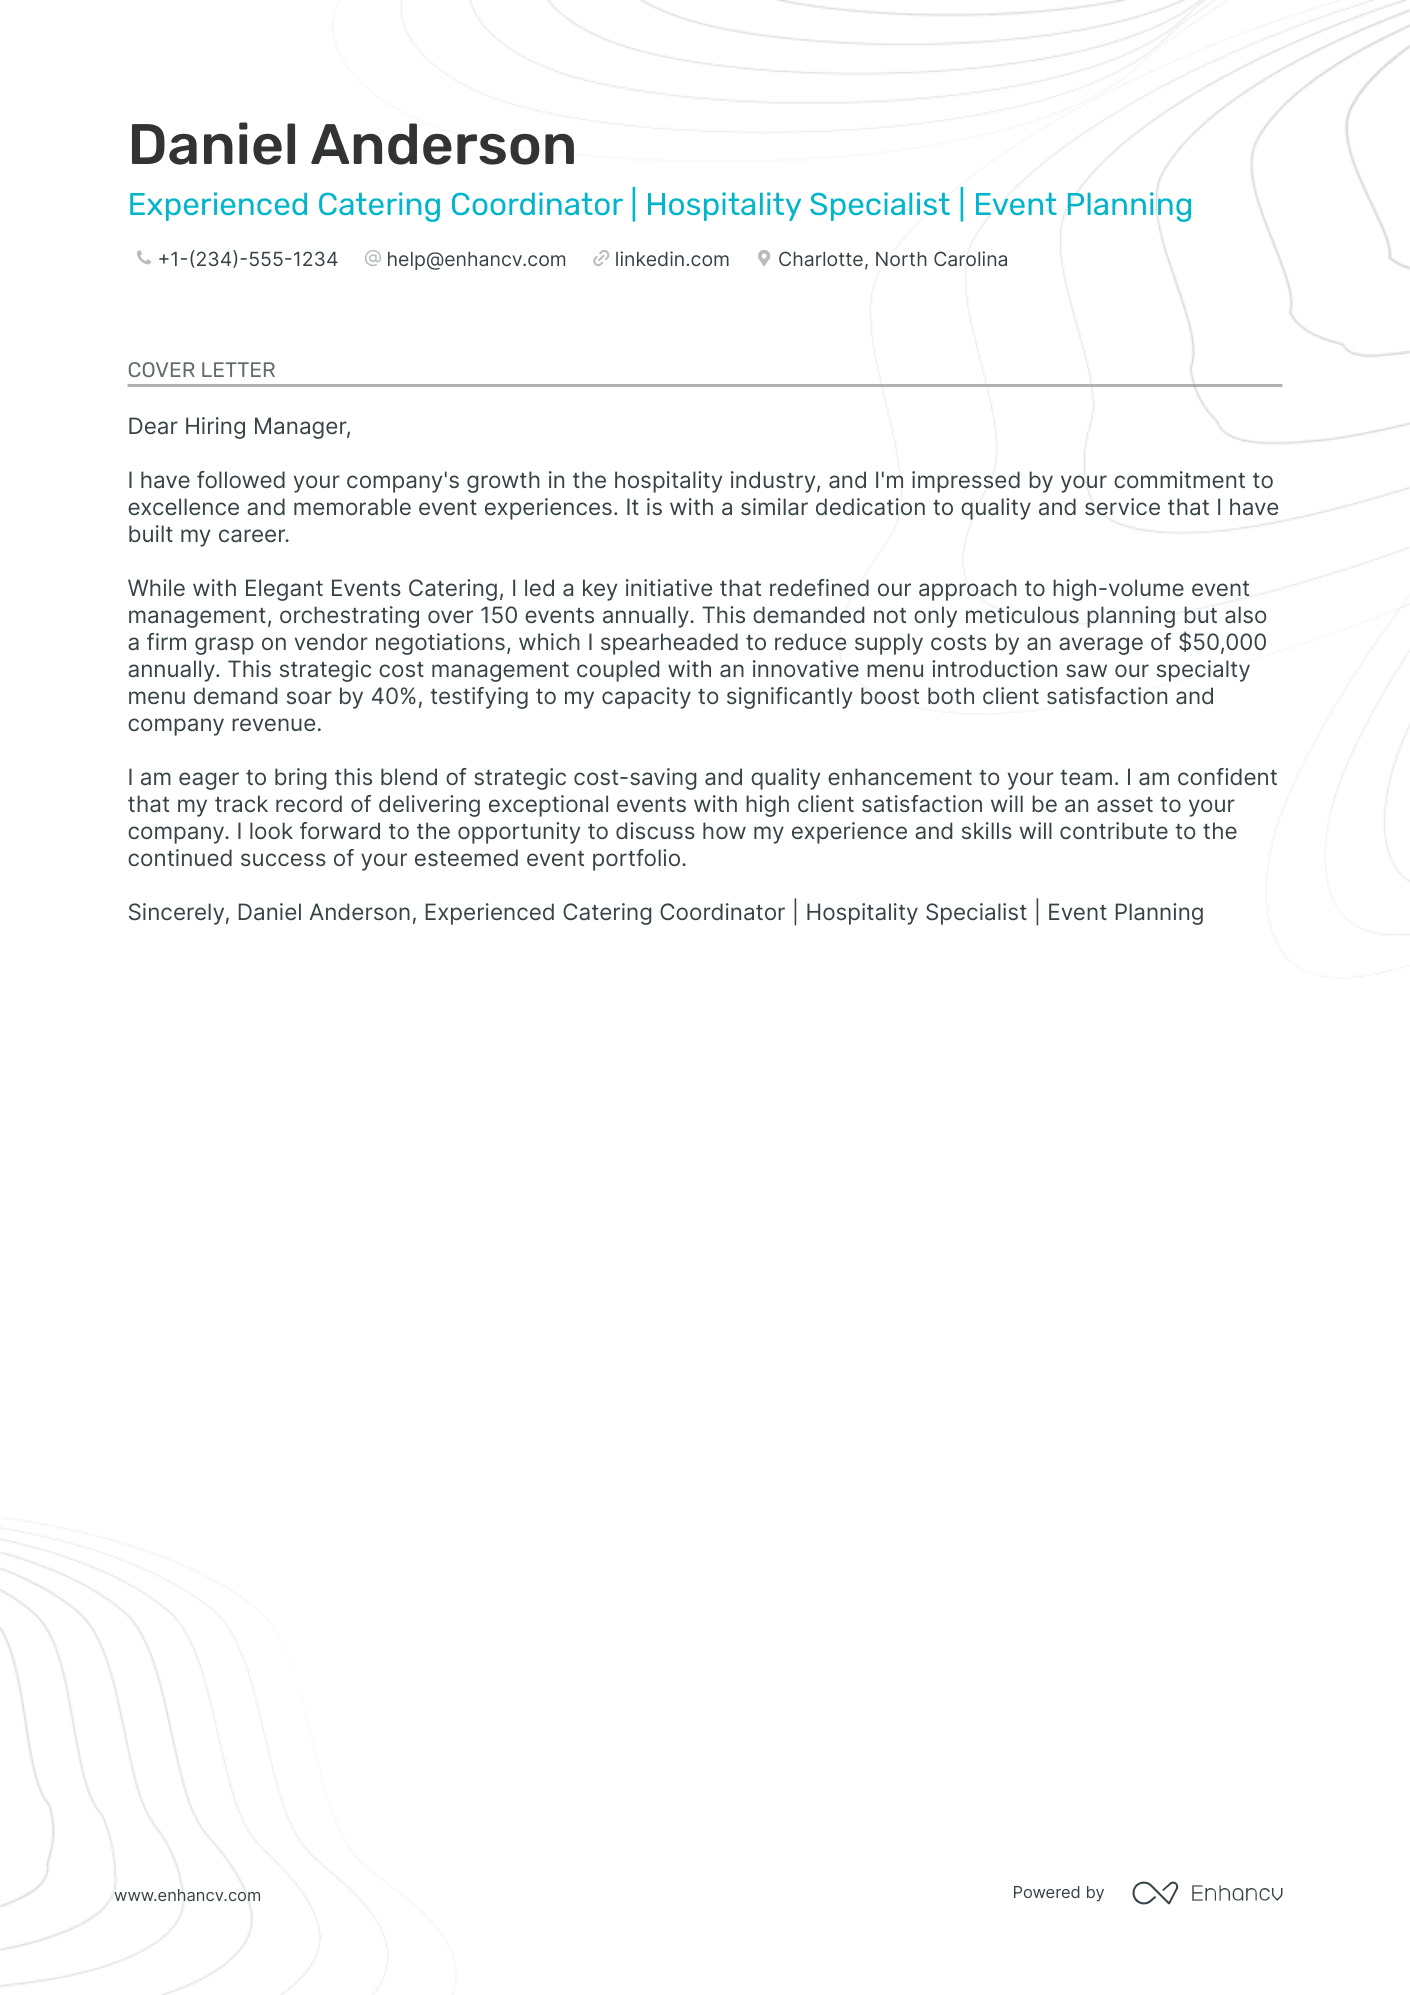 cover letter example for server job